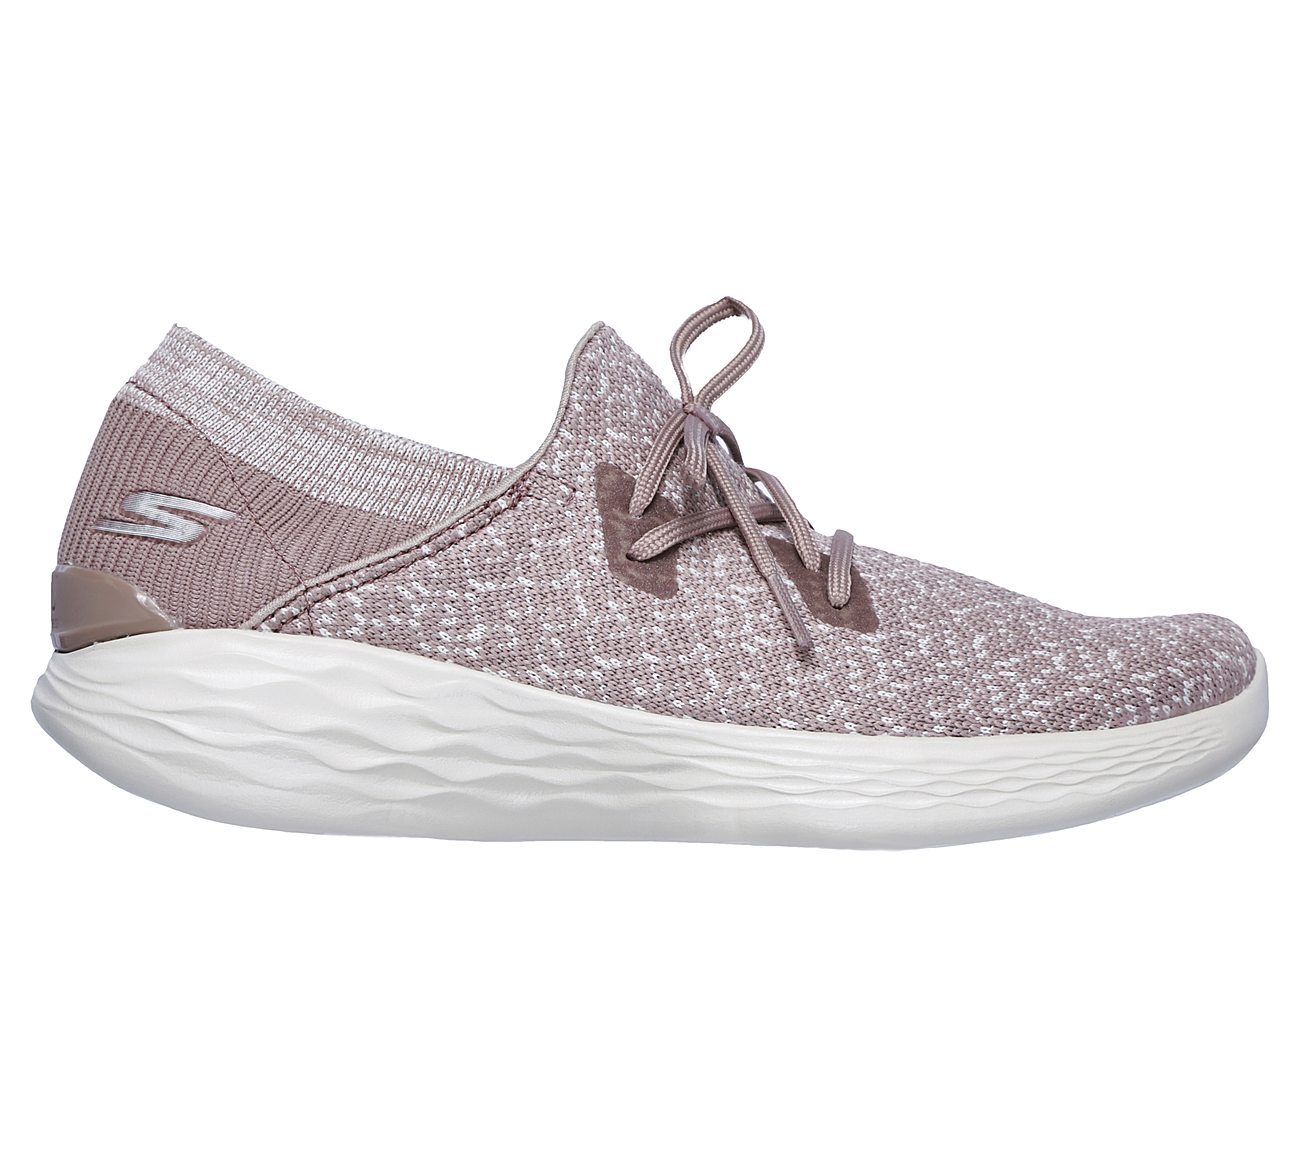 SKECHERS YOU - Exhale YOU by skechers Shoes